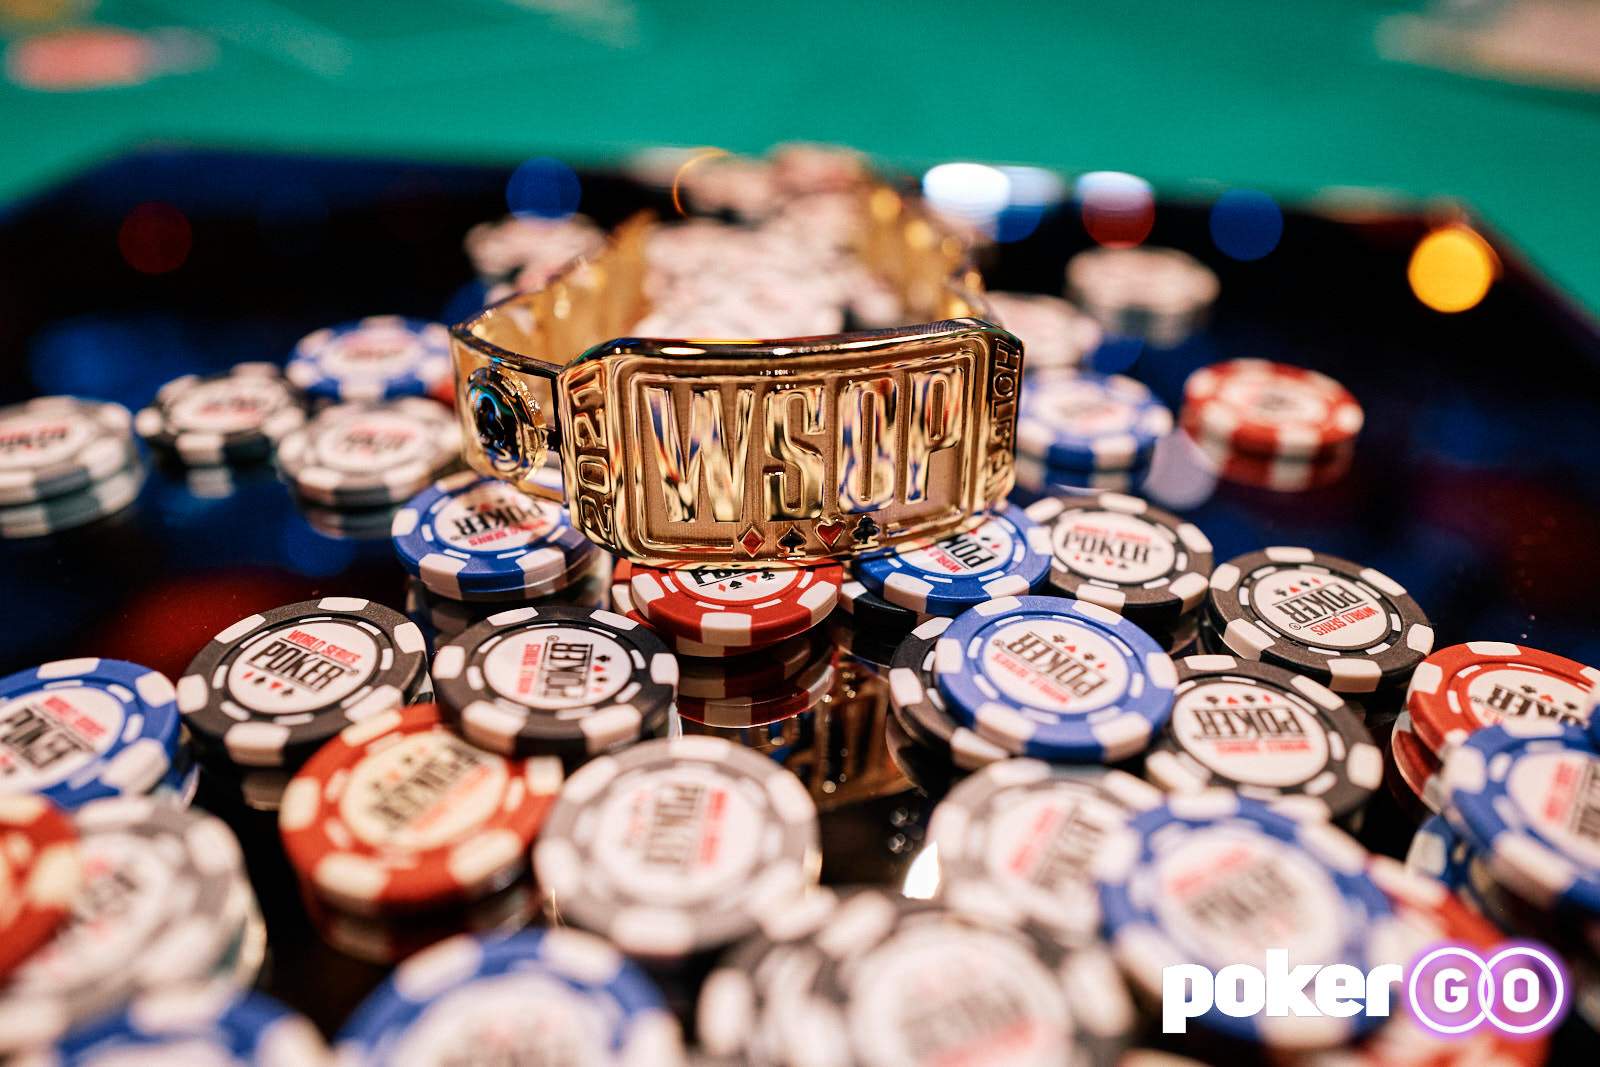 WSOP Adds Two Main Event Starting Flights After U.S. Announces End of Travel Restrictions